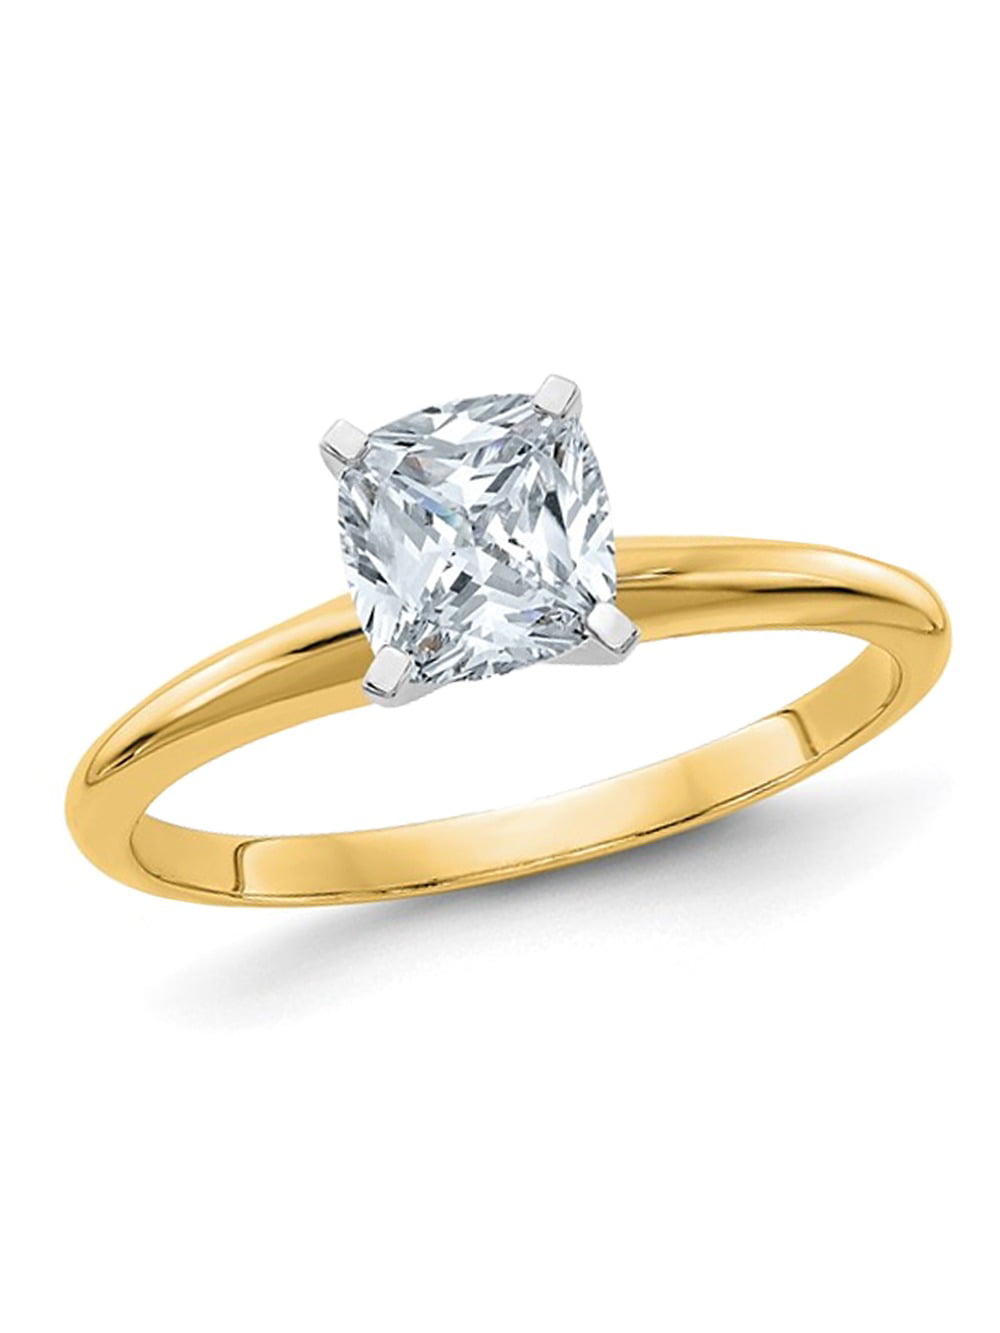 1.00 Carat Synthetic Moissanite Solitaire Engagement Ring in 14K Yellow Gold ctw Color G-H